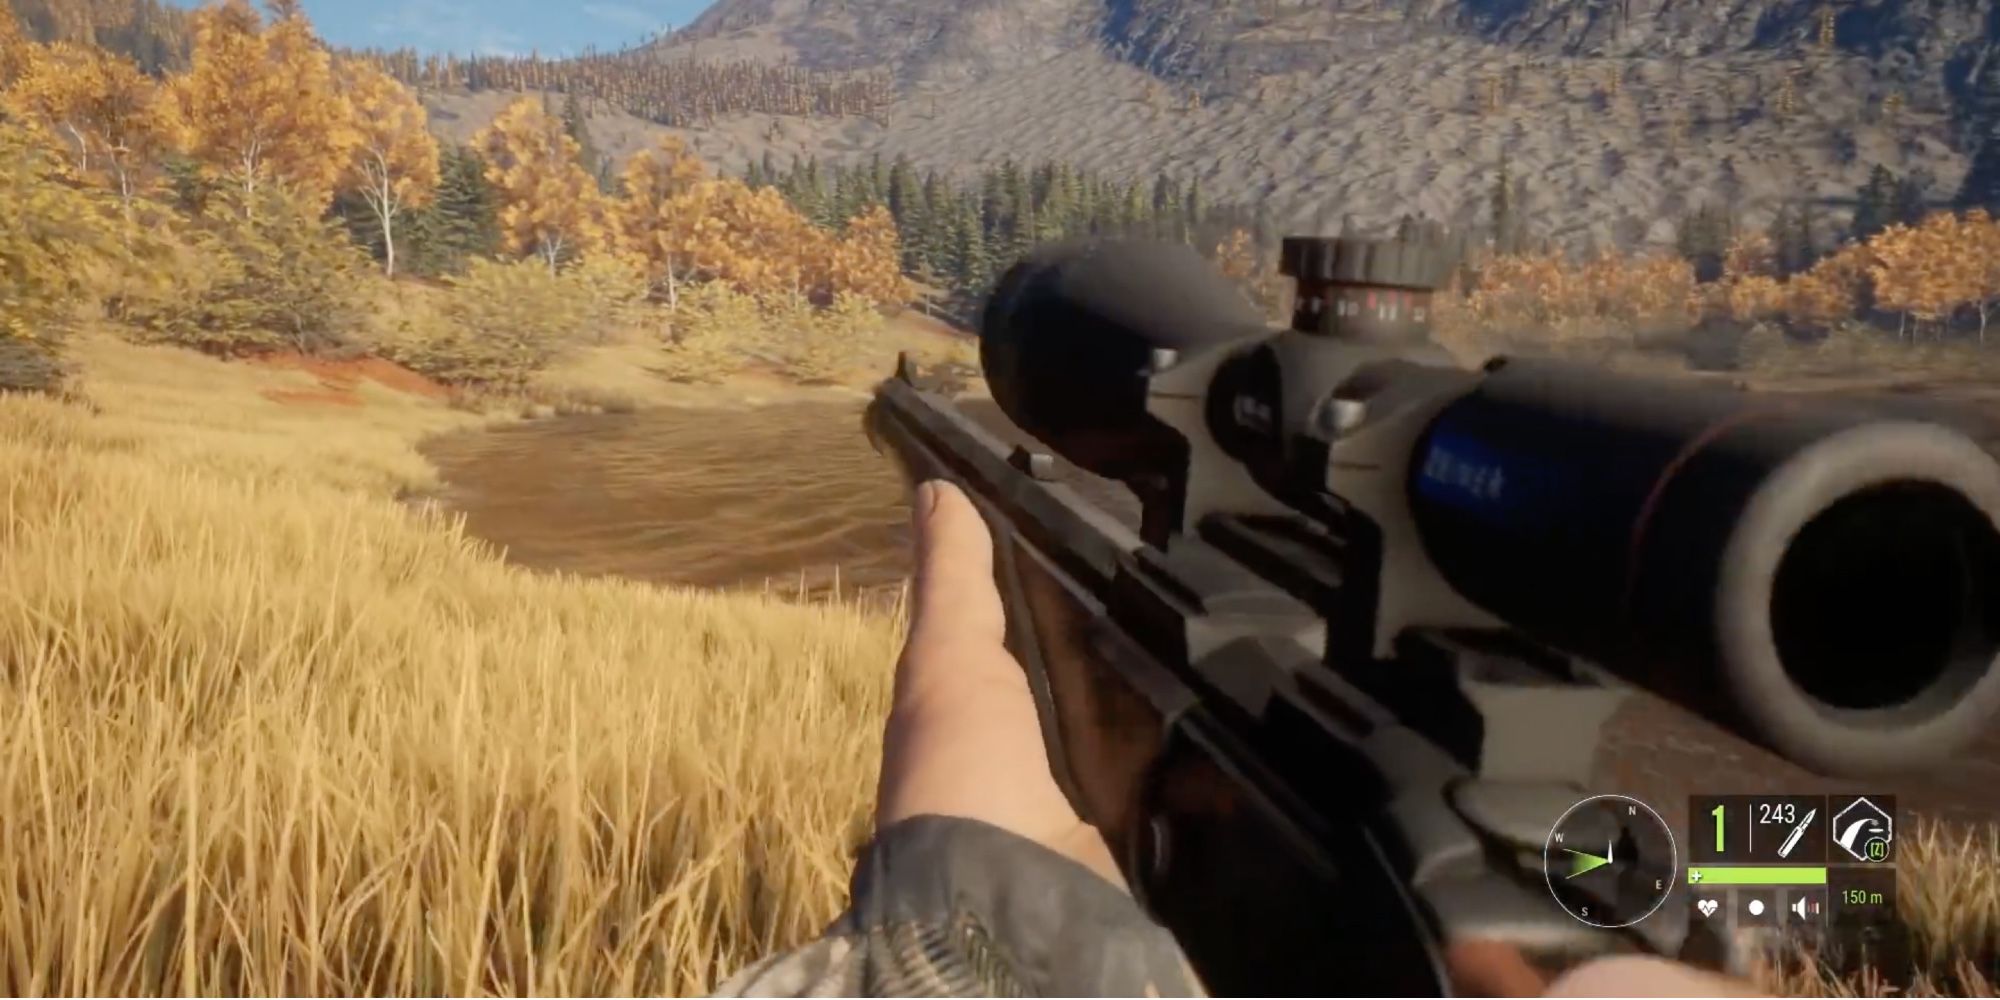 Best Reserves in TheHunter - Call of the Wild - Layton Lake District - Player uses rifle to kill animals